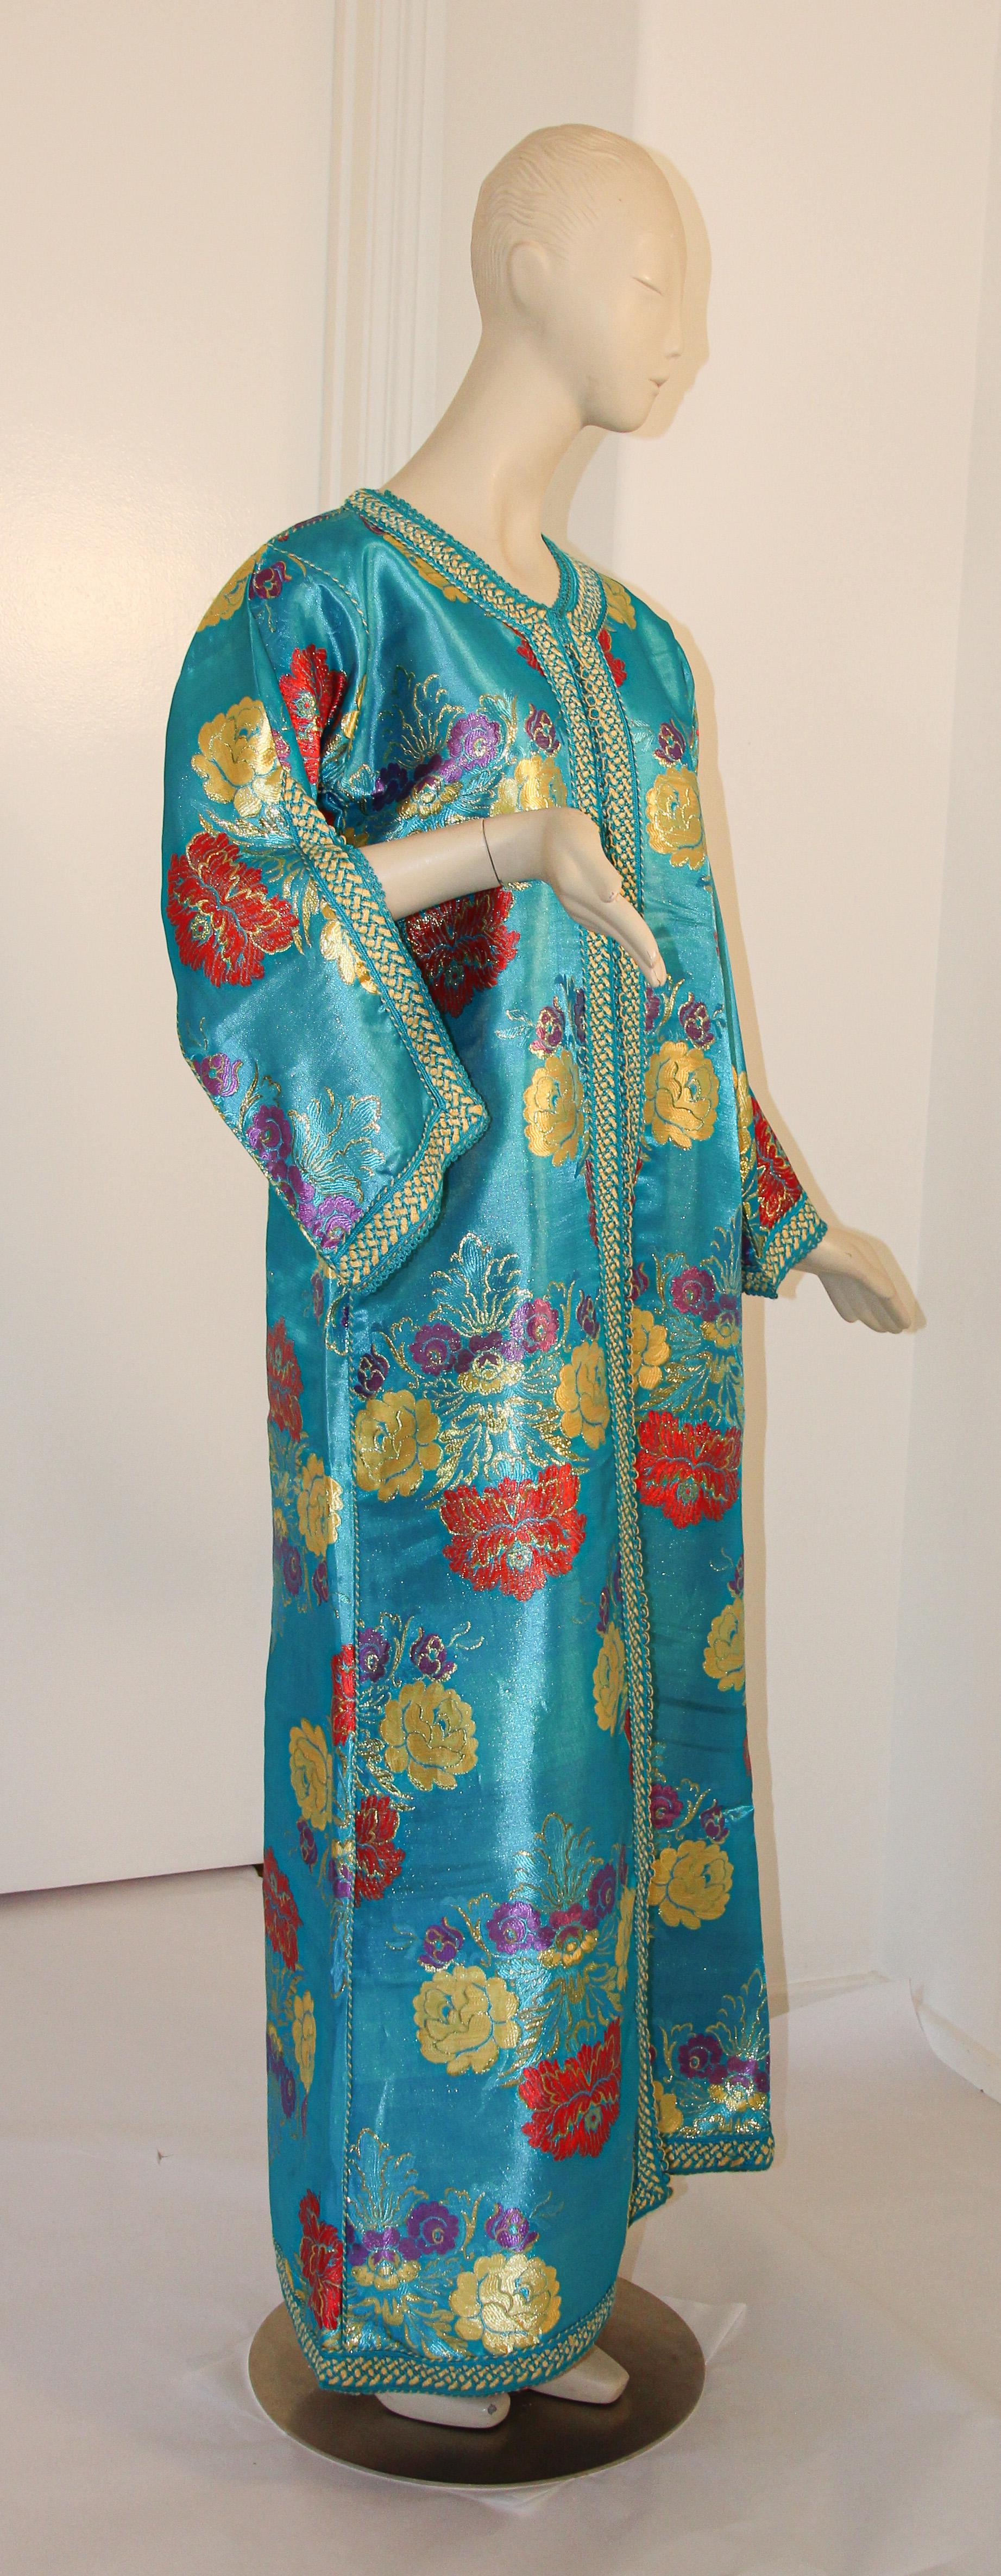 Elegant Moroccan Caftan in Blue Metallic Floral Brocade In Good Condition For Sale In North Hollywood, CA